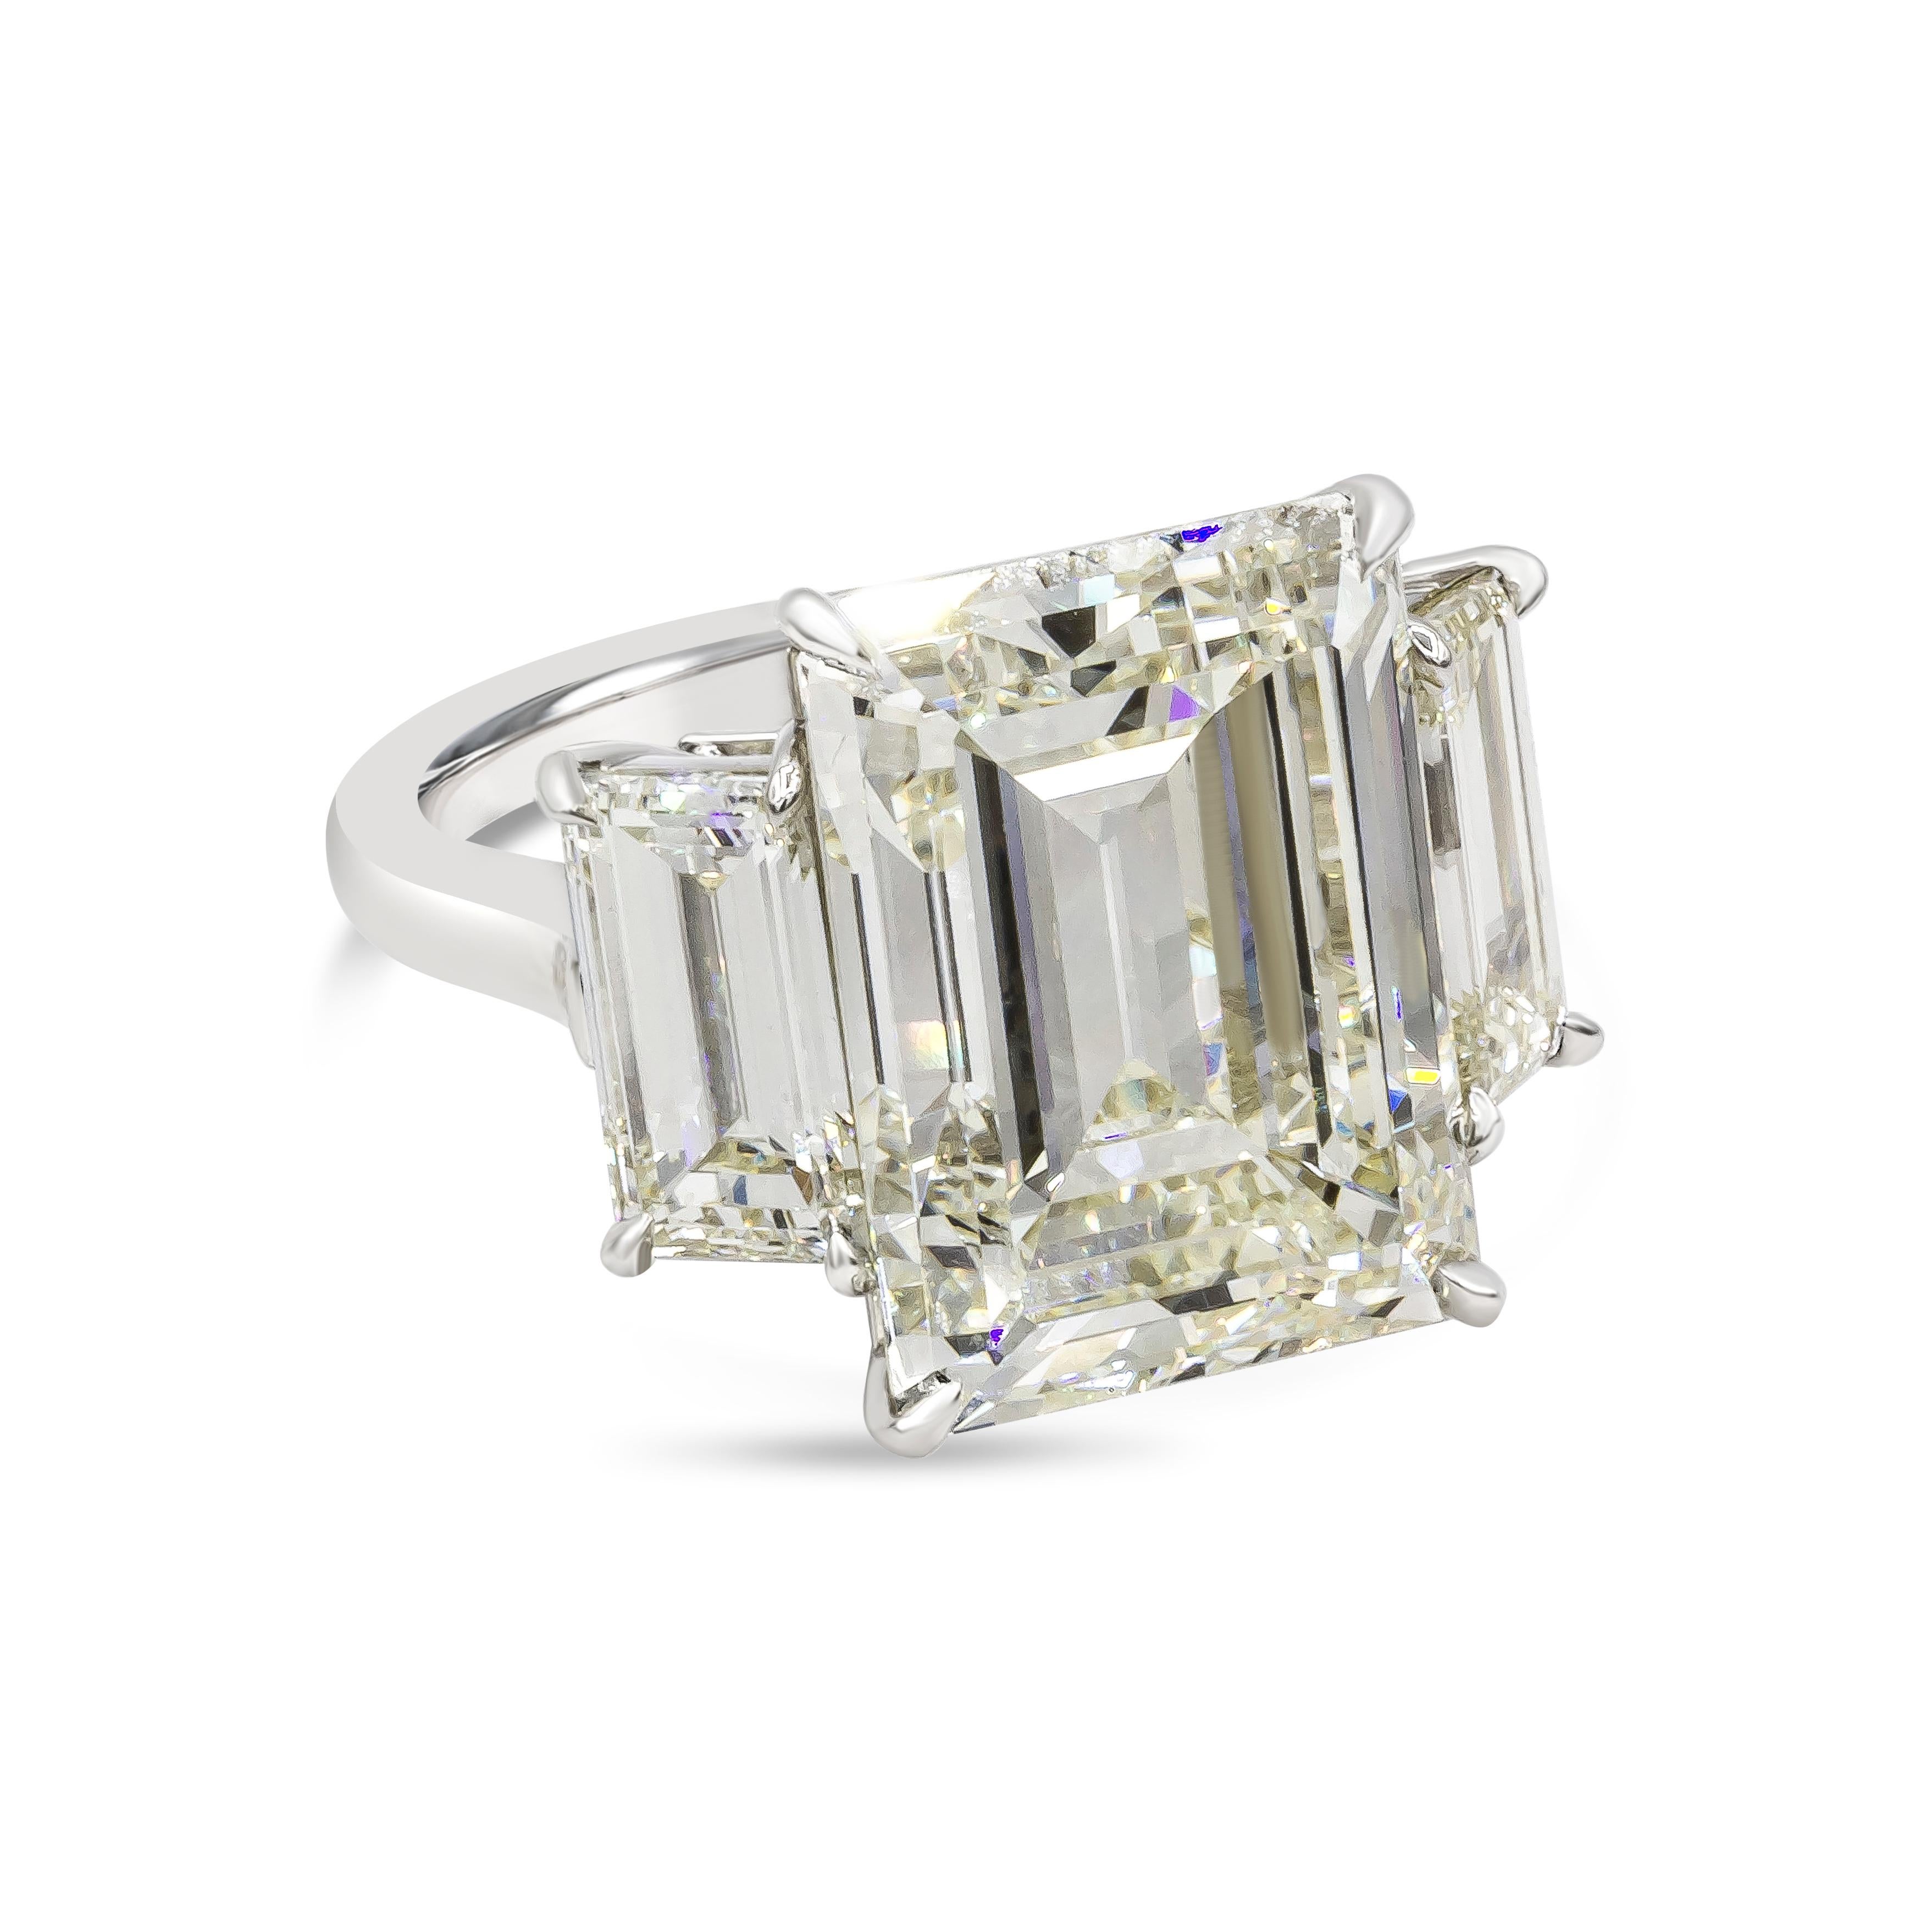 A rare and spectacular engagement ring showcasing a 14.18 carat emerald cut diamond center stone certified by GIA as M color, VVS2 clarity. Flanked by baguette diamond on each side weighing 3.81 carats total, M color, VS in clarity. Finely made in